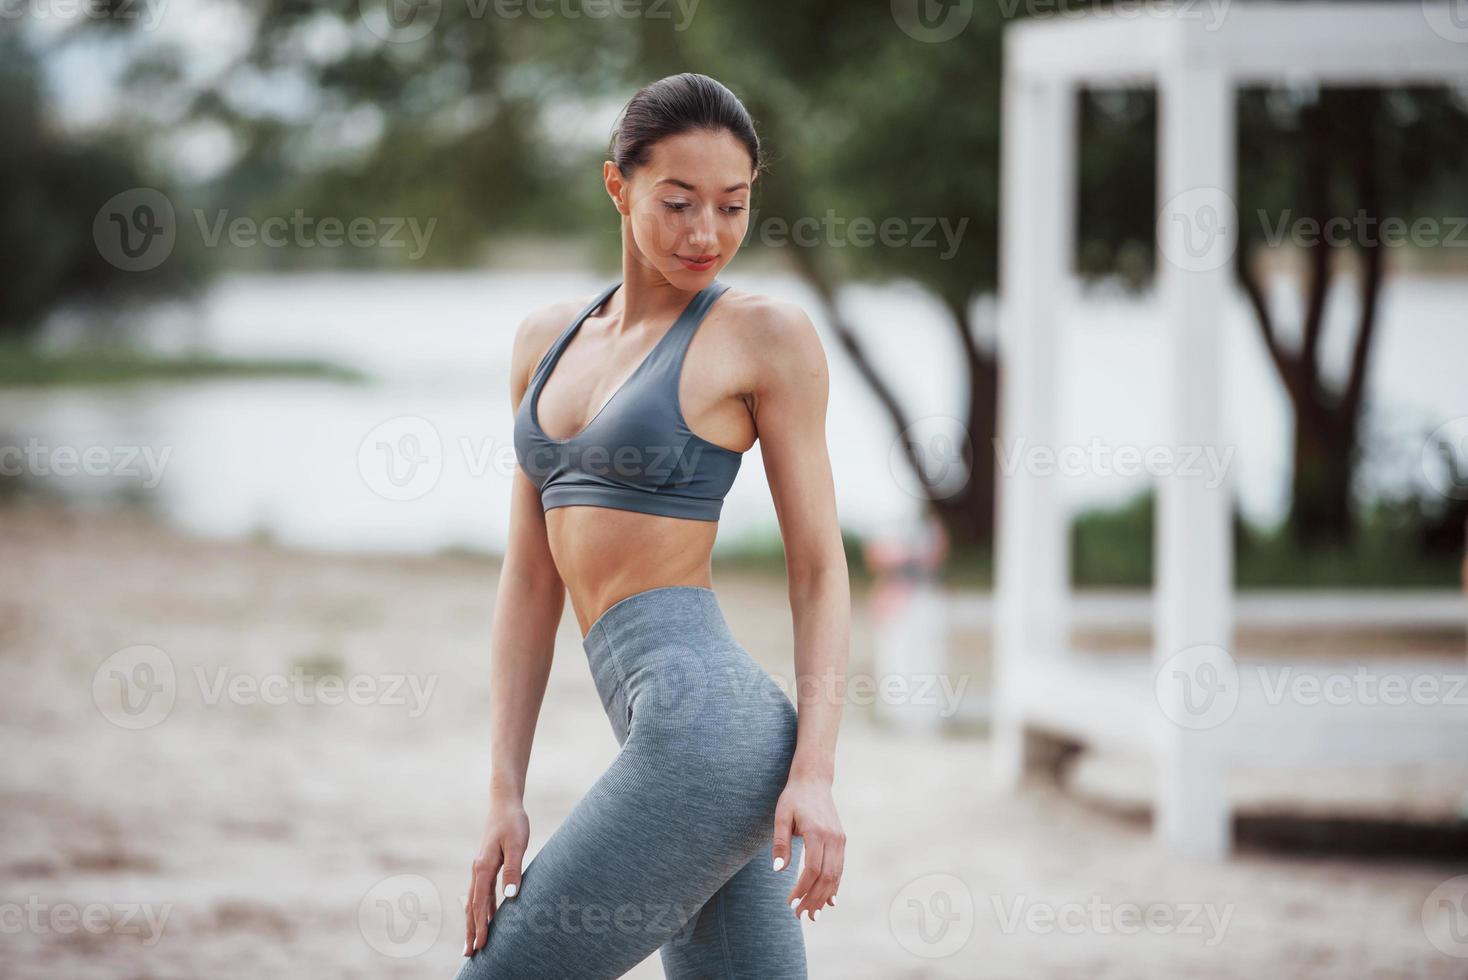 Alone in the park. Brunette with nice body shape in sportive clothes have fitness day on a beach photo